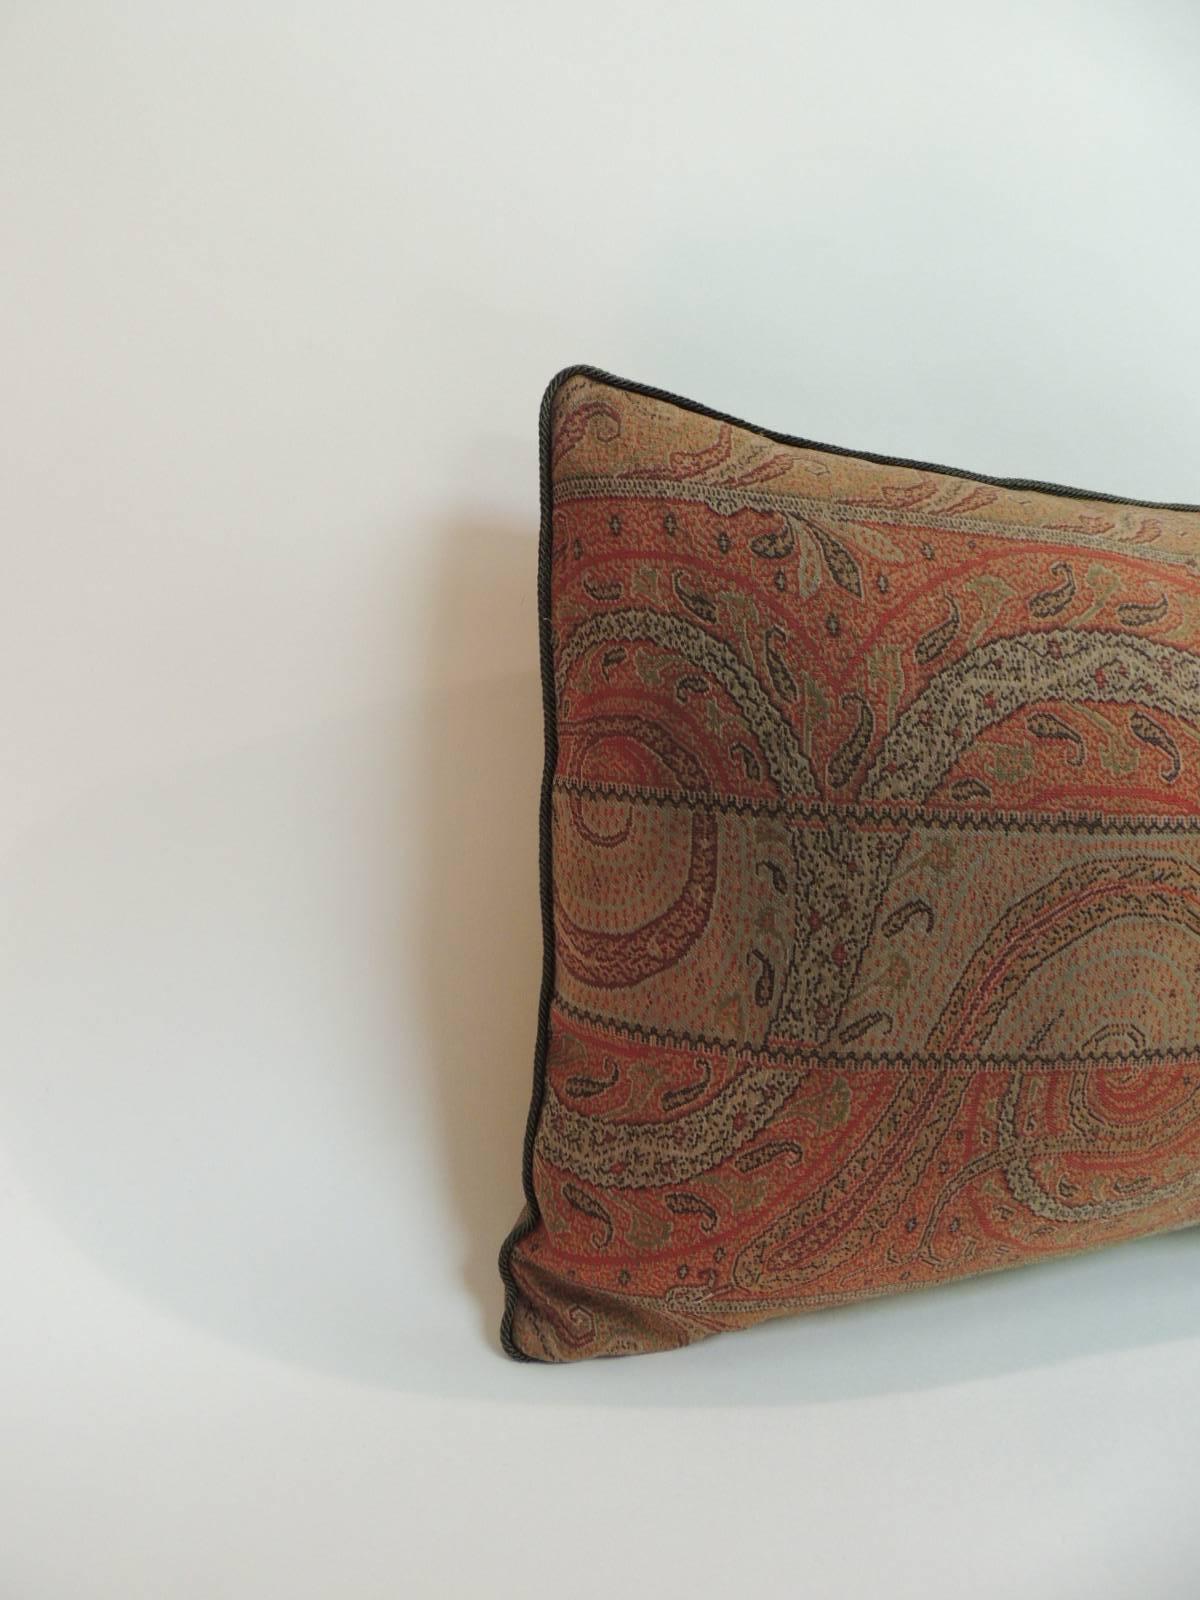 Antique wool paisley bolster pillow, embellished with small green rope trim all around and textured brown backing. In shades of green, red, brown, orange, brown, black and yellow.
Needle embroidery. handcrafted decorative pillow made with a textile